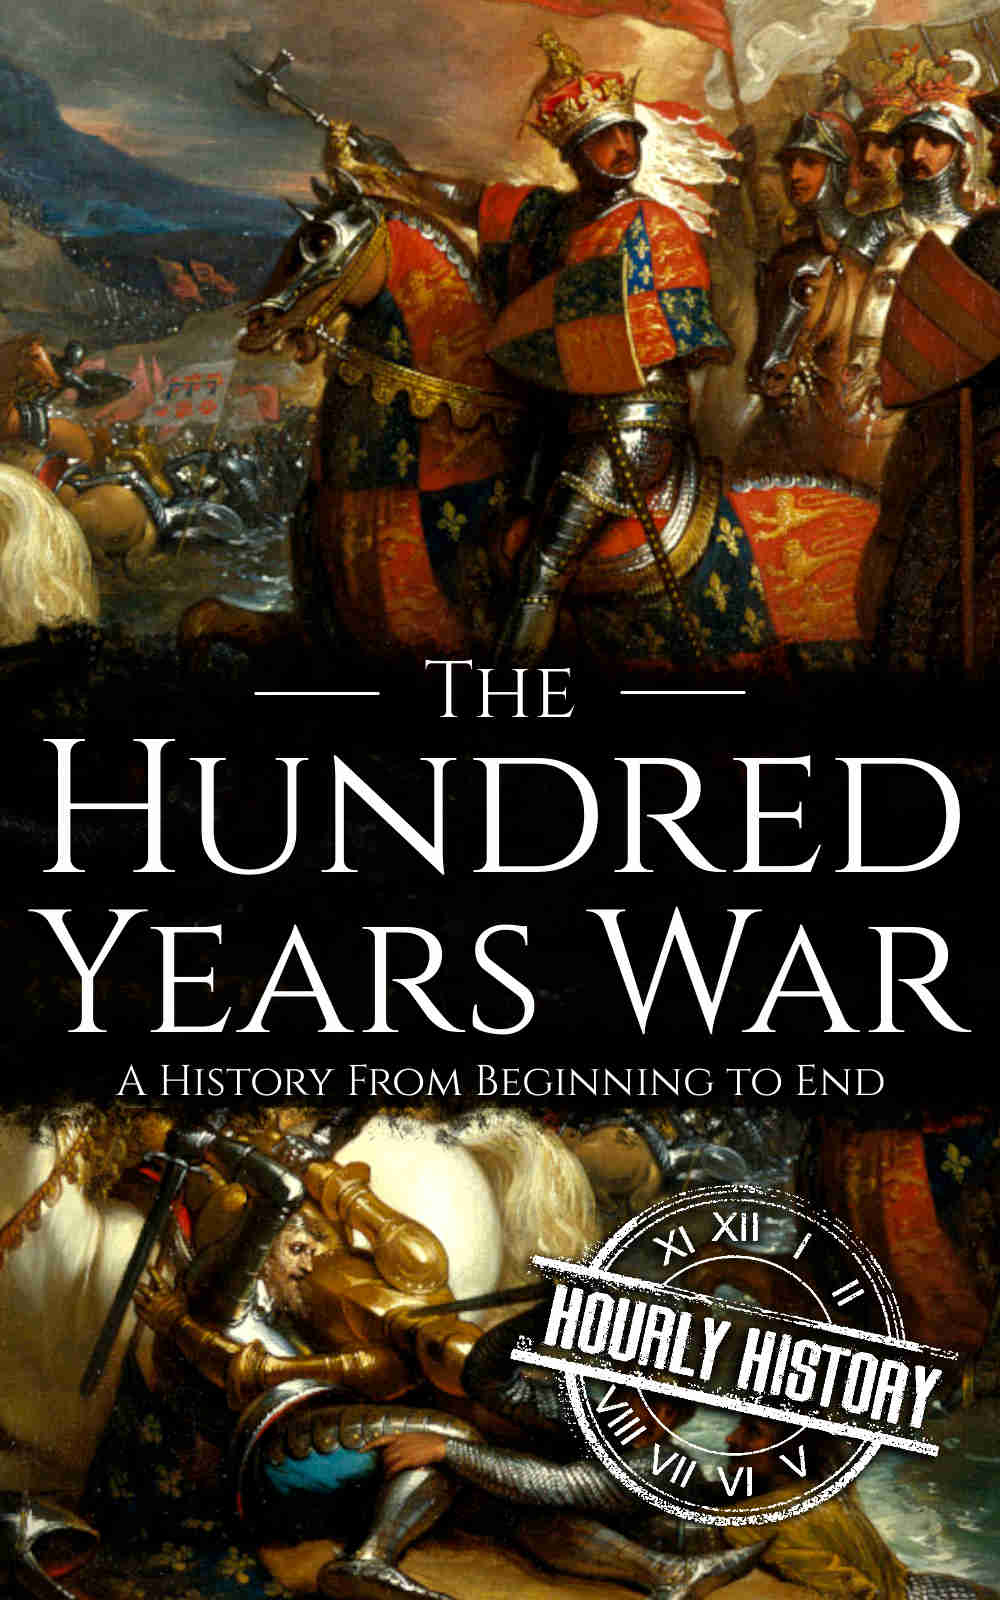 The Hundred Years War Book And Facts 1 Source Of History Books